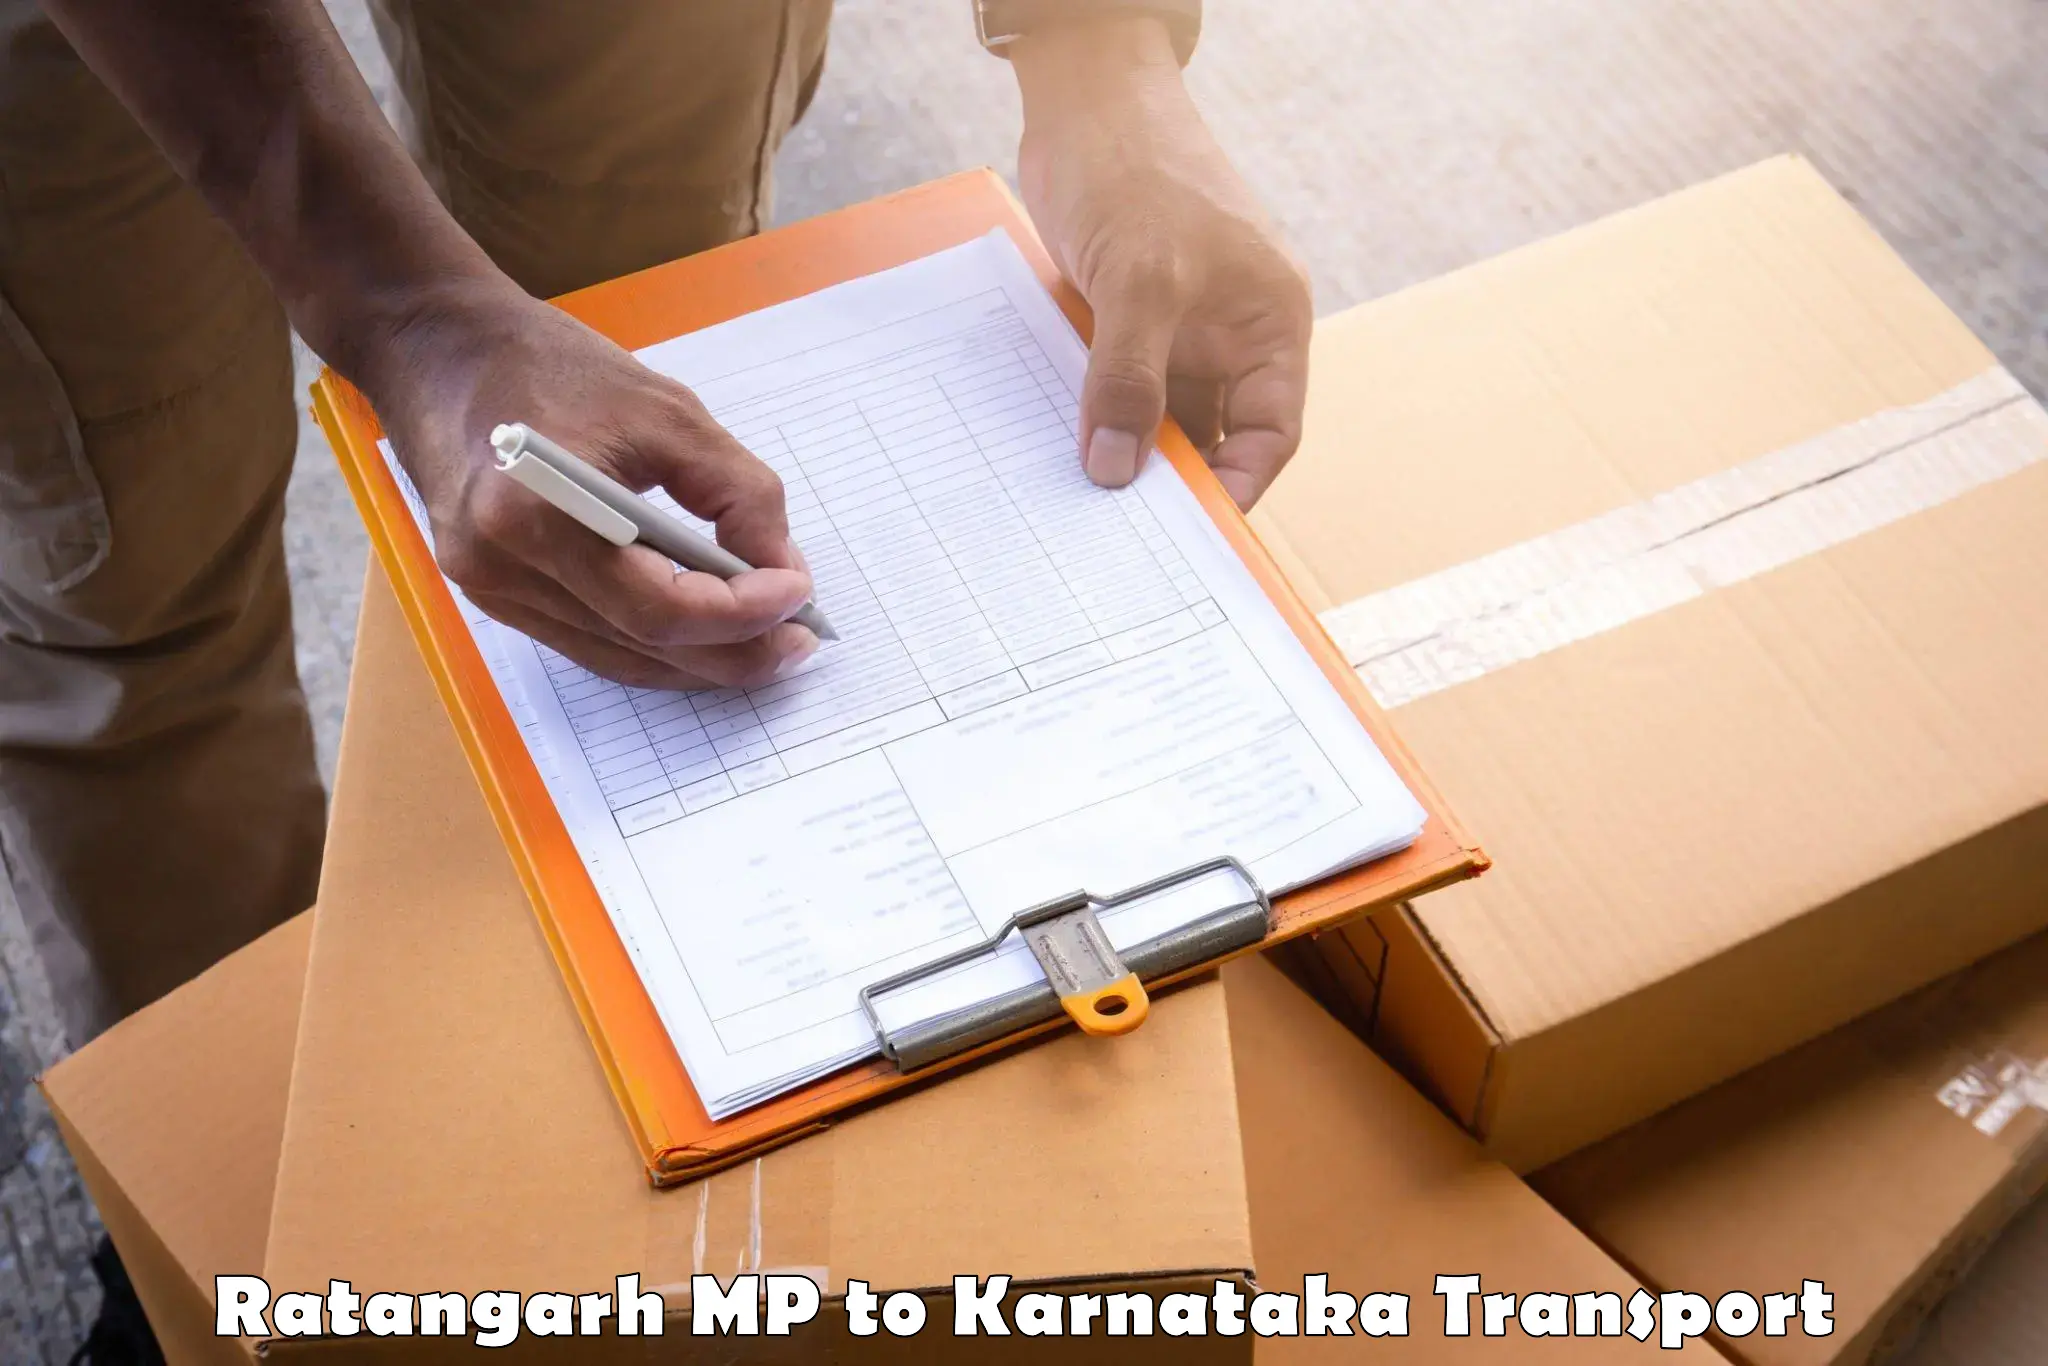 Commercial transport service Ratangarh MP to Siruguppa